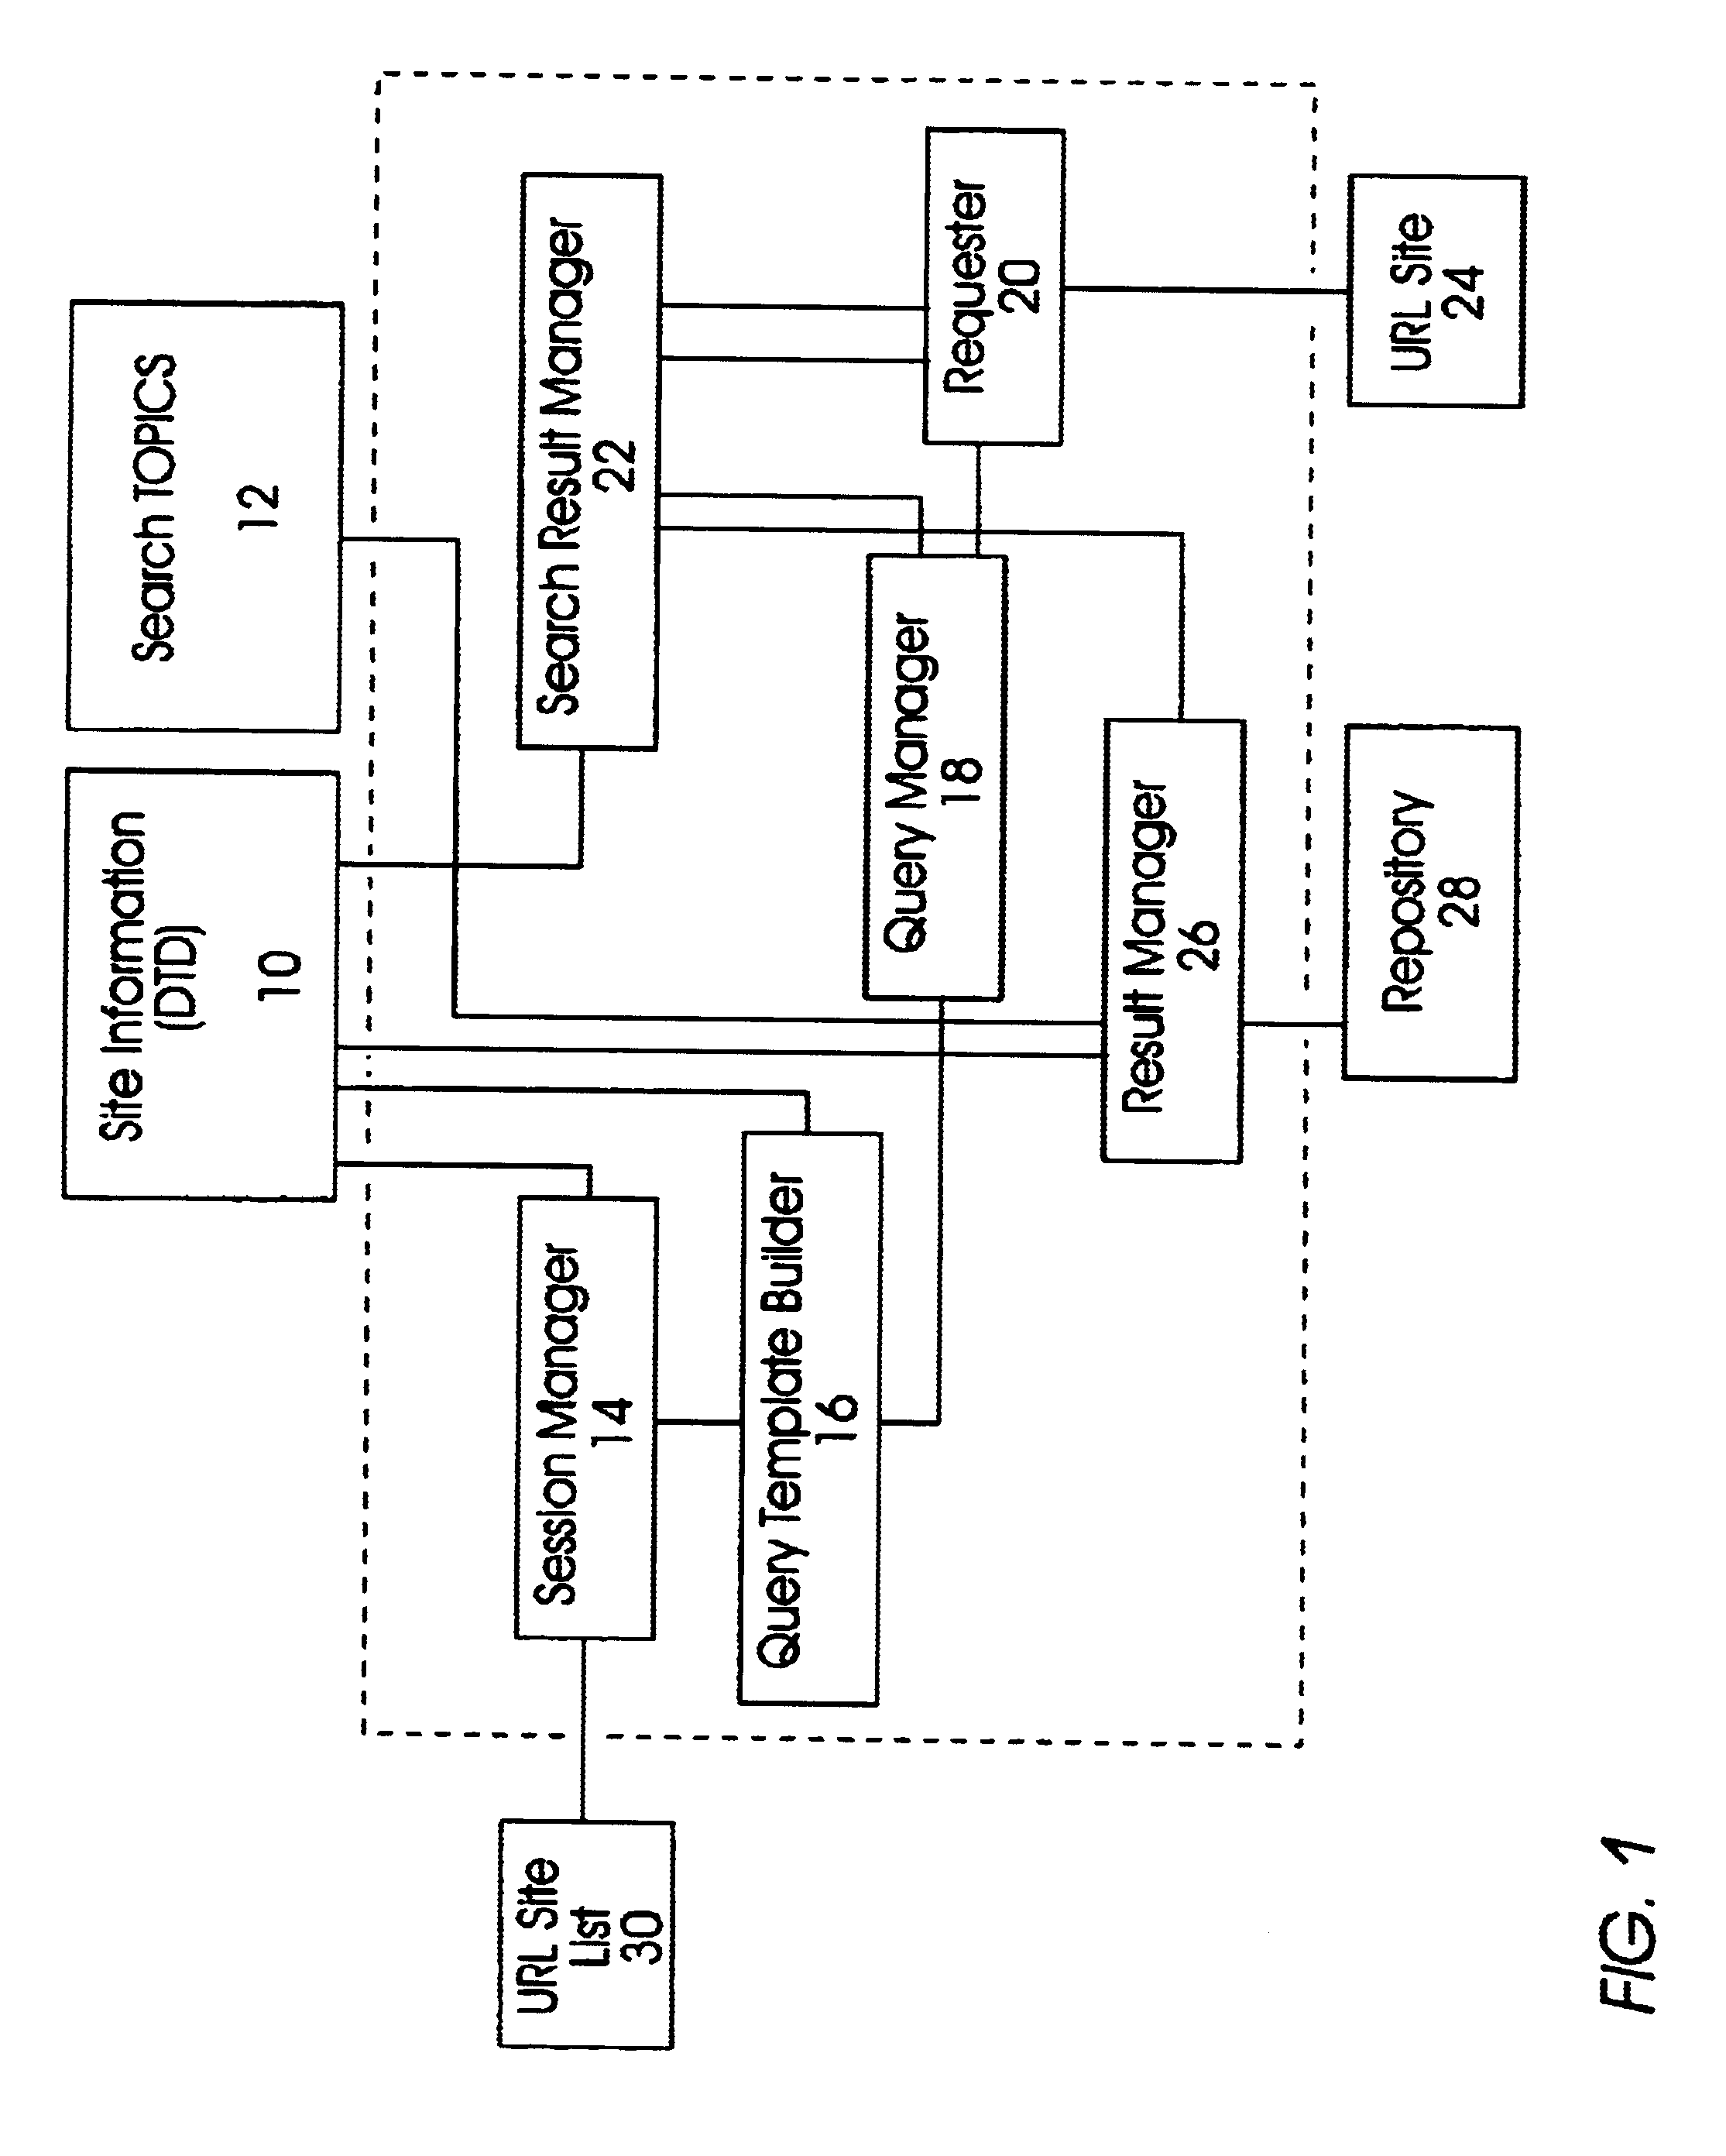 System and method for automatically gathering dynamic content and resources on the world wide web by stimulating user interaction and managing session information